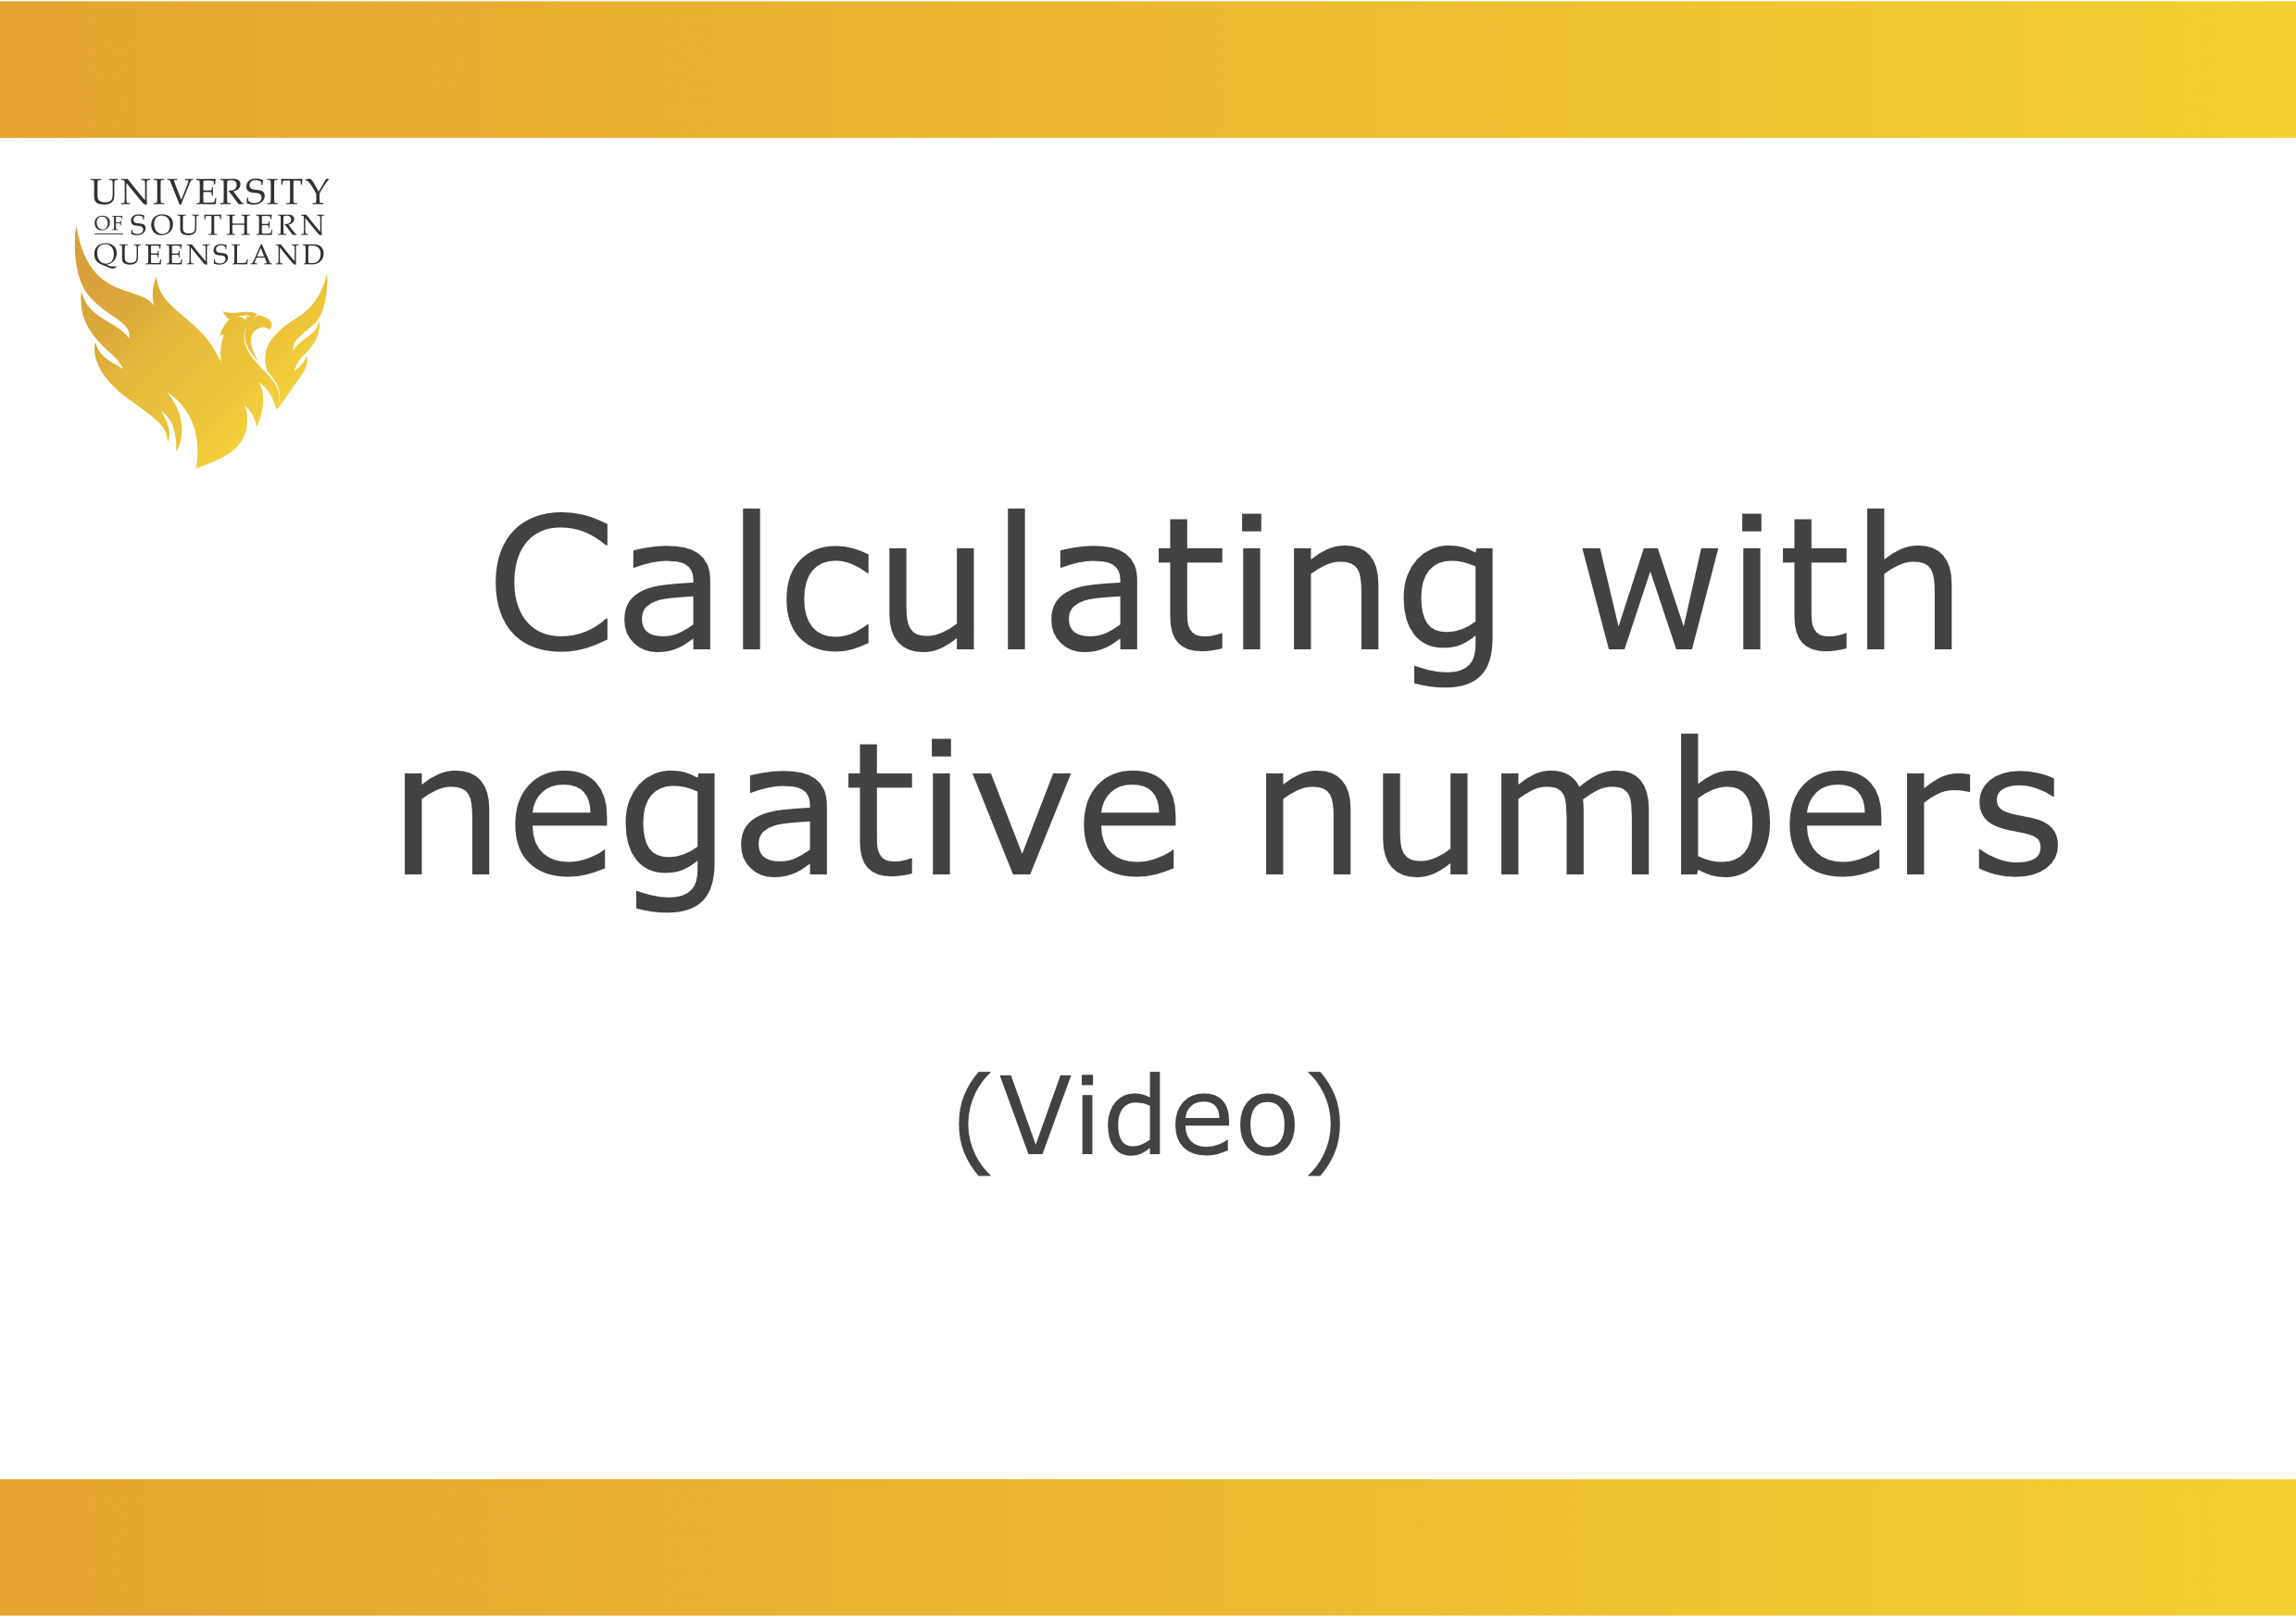 link to video for calculating with negative numbers